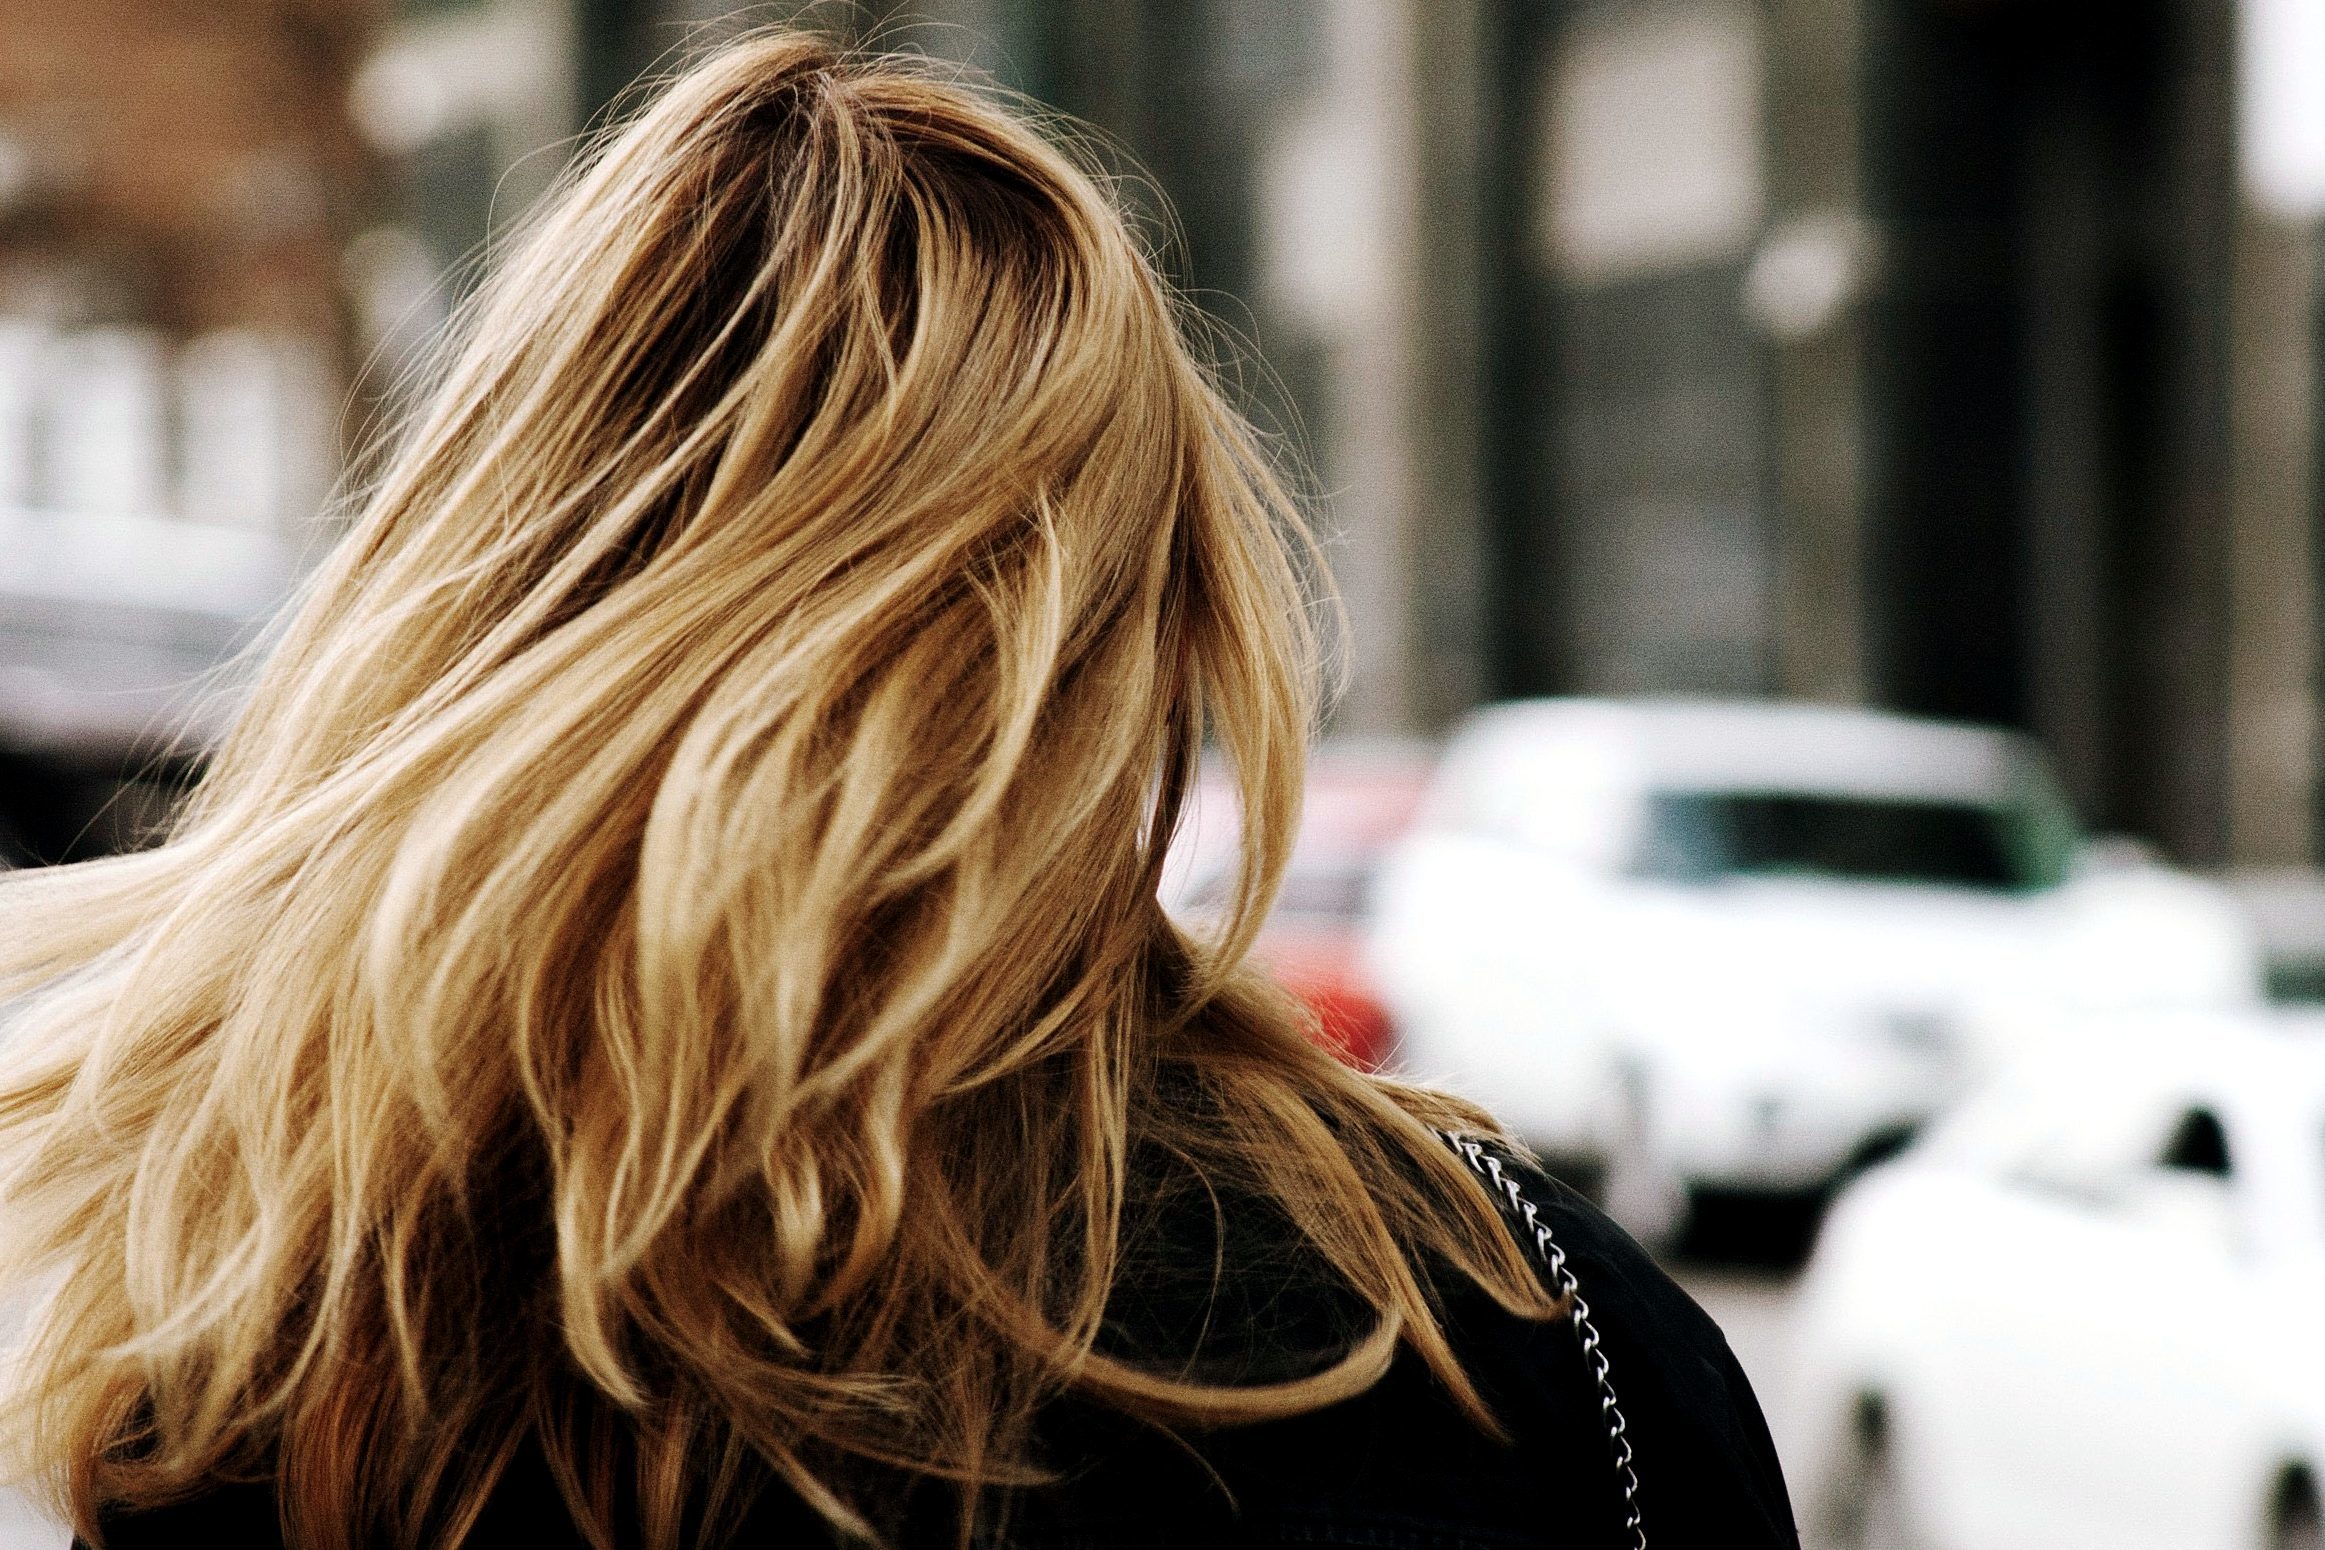 Blonde woman with wavy hair looking back - wide 6